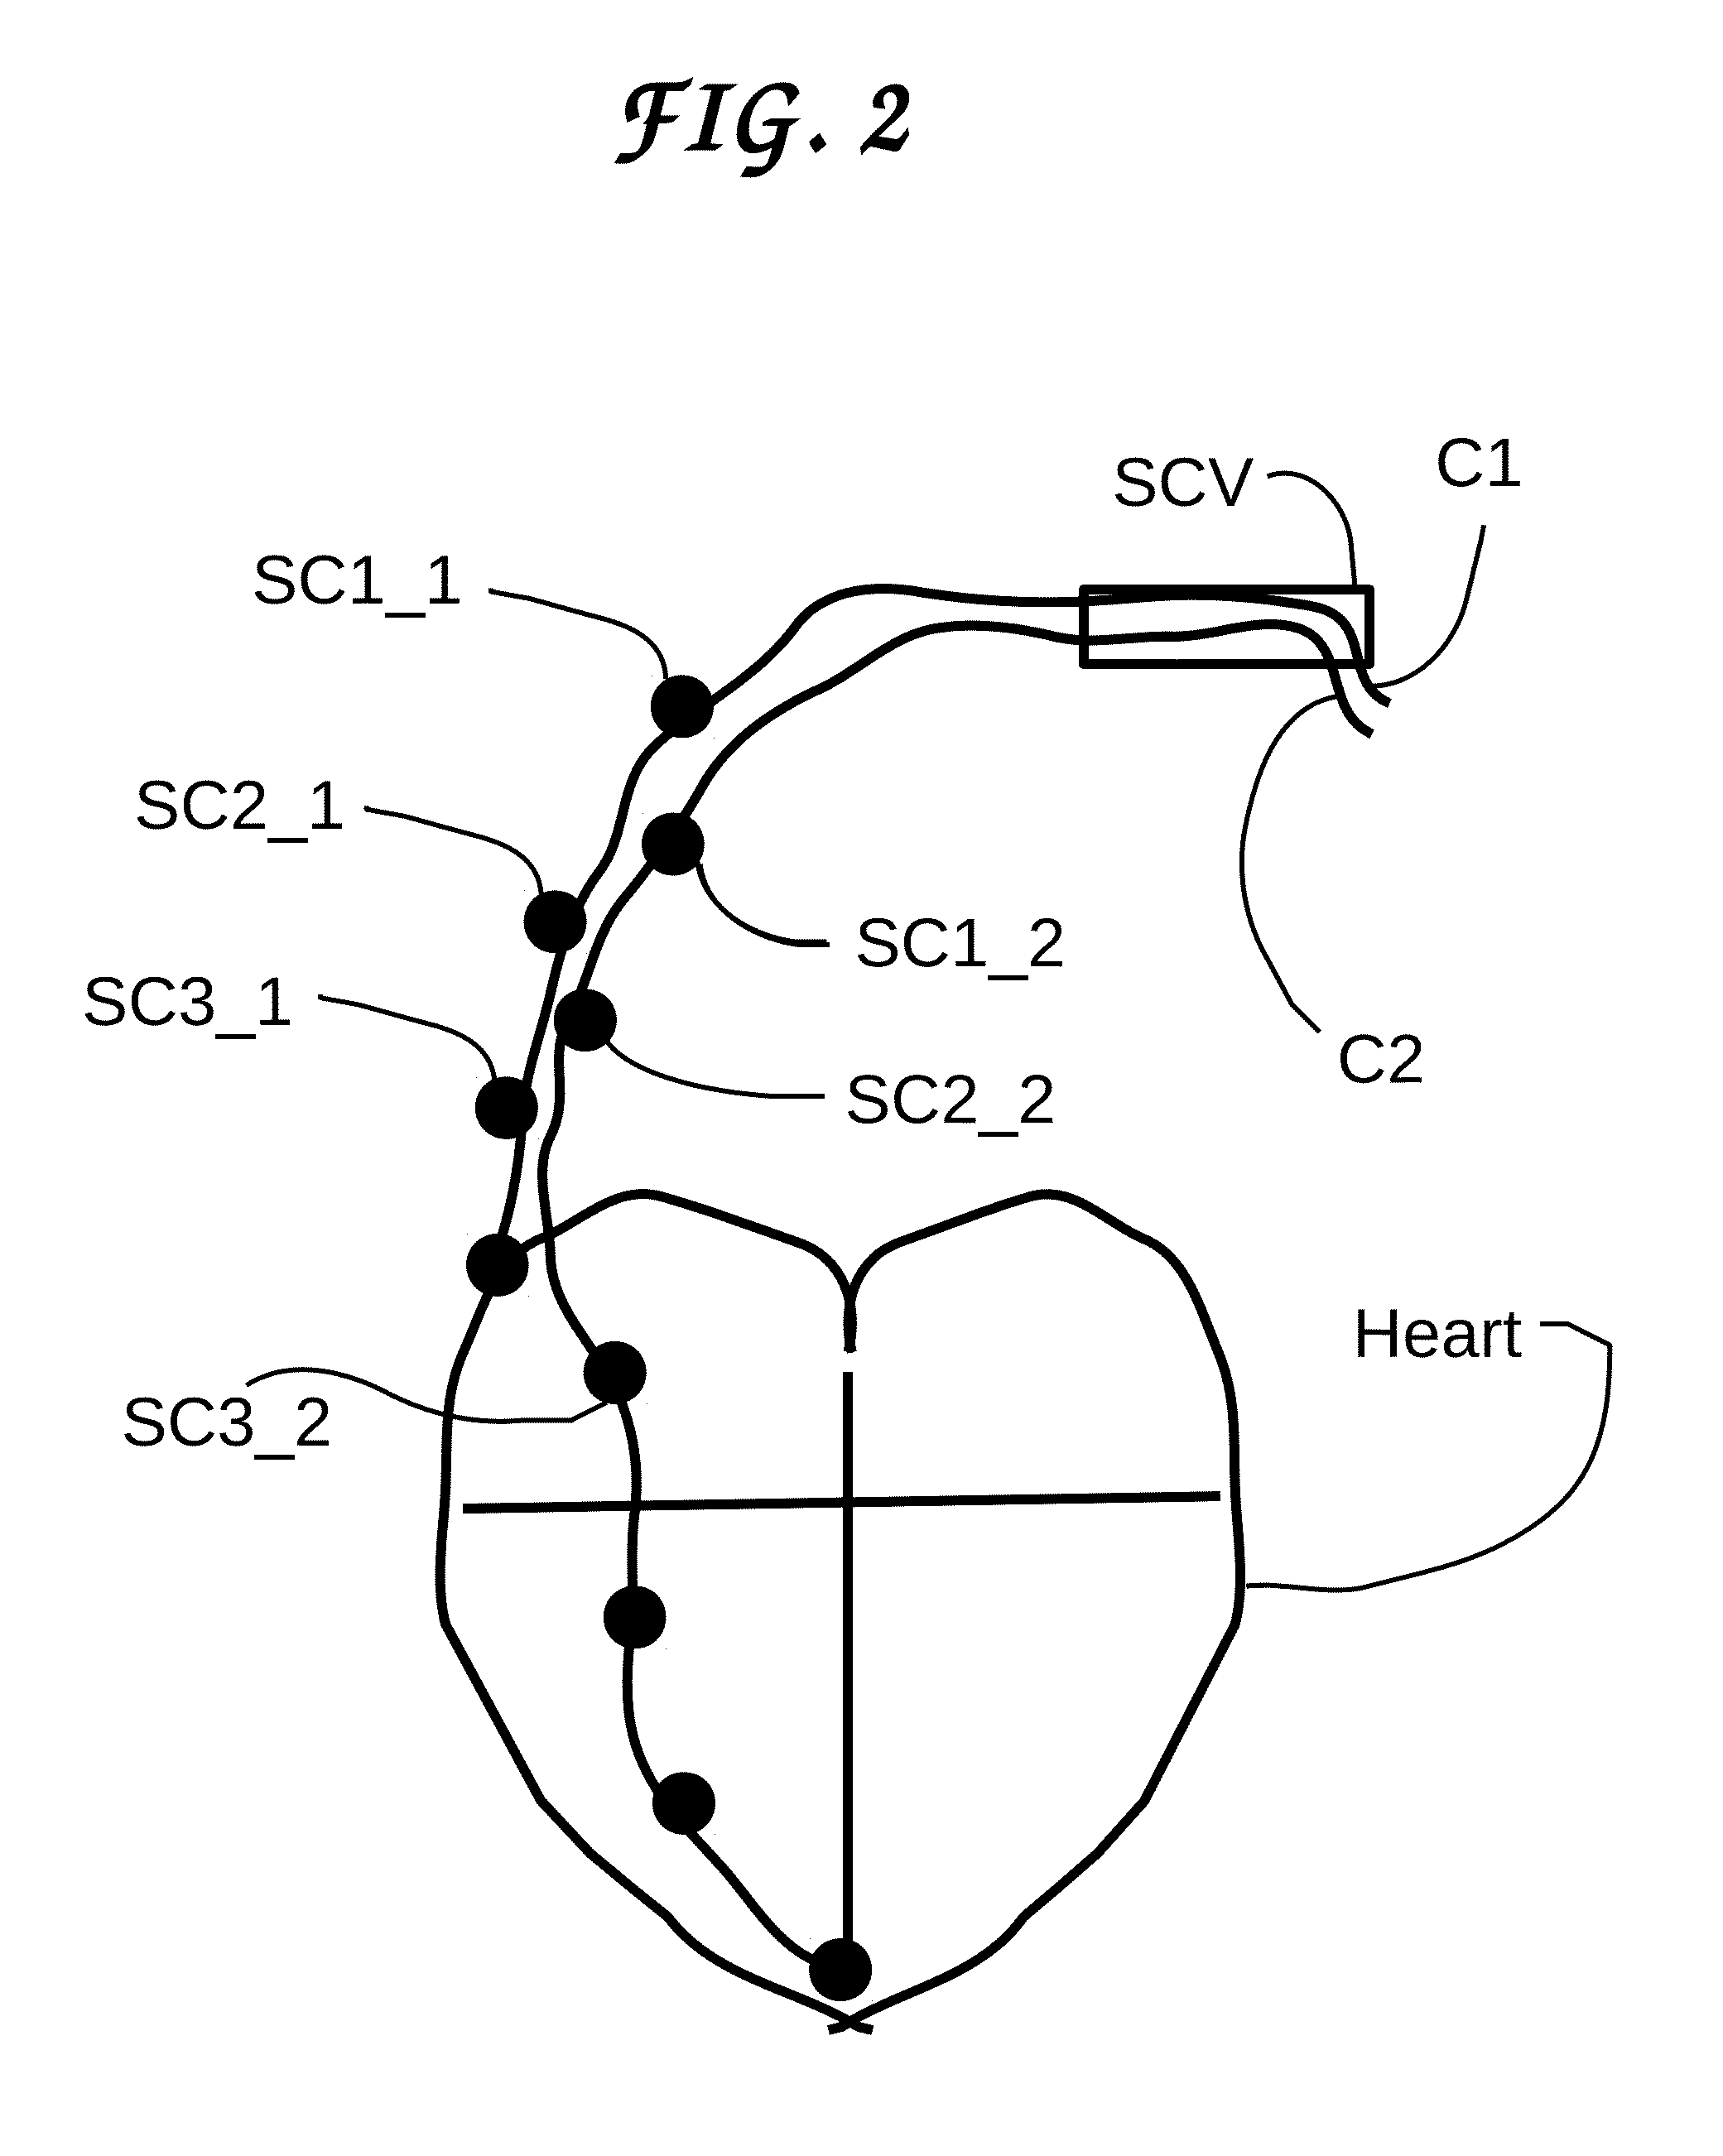 Cell electric stimulator with separate electrodes for electrical field shaping and for stimulation